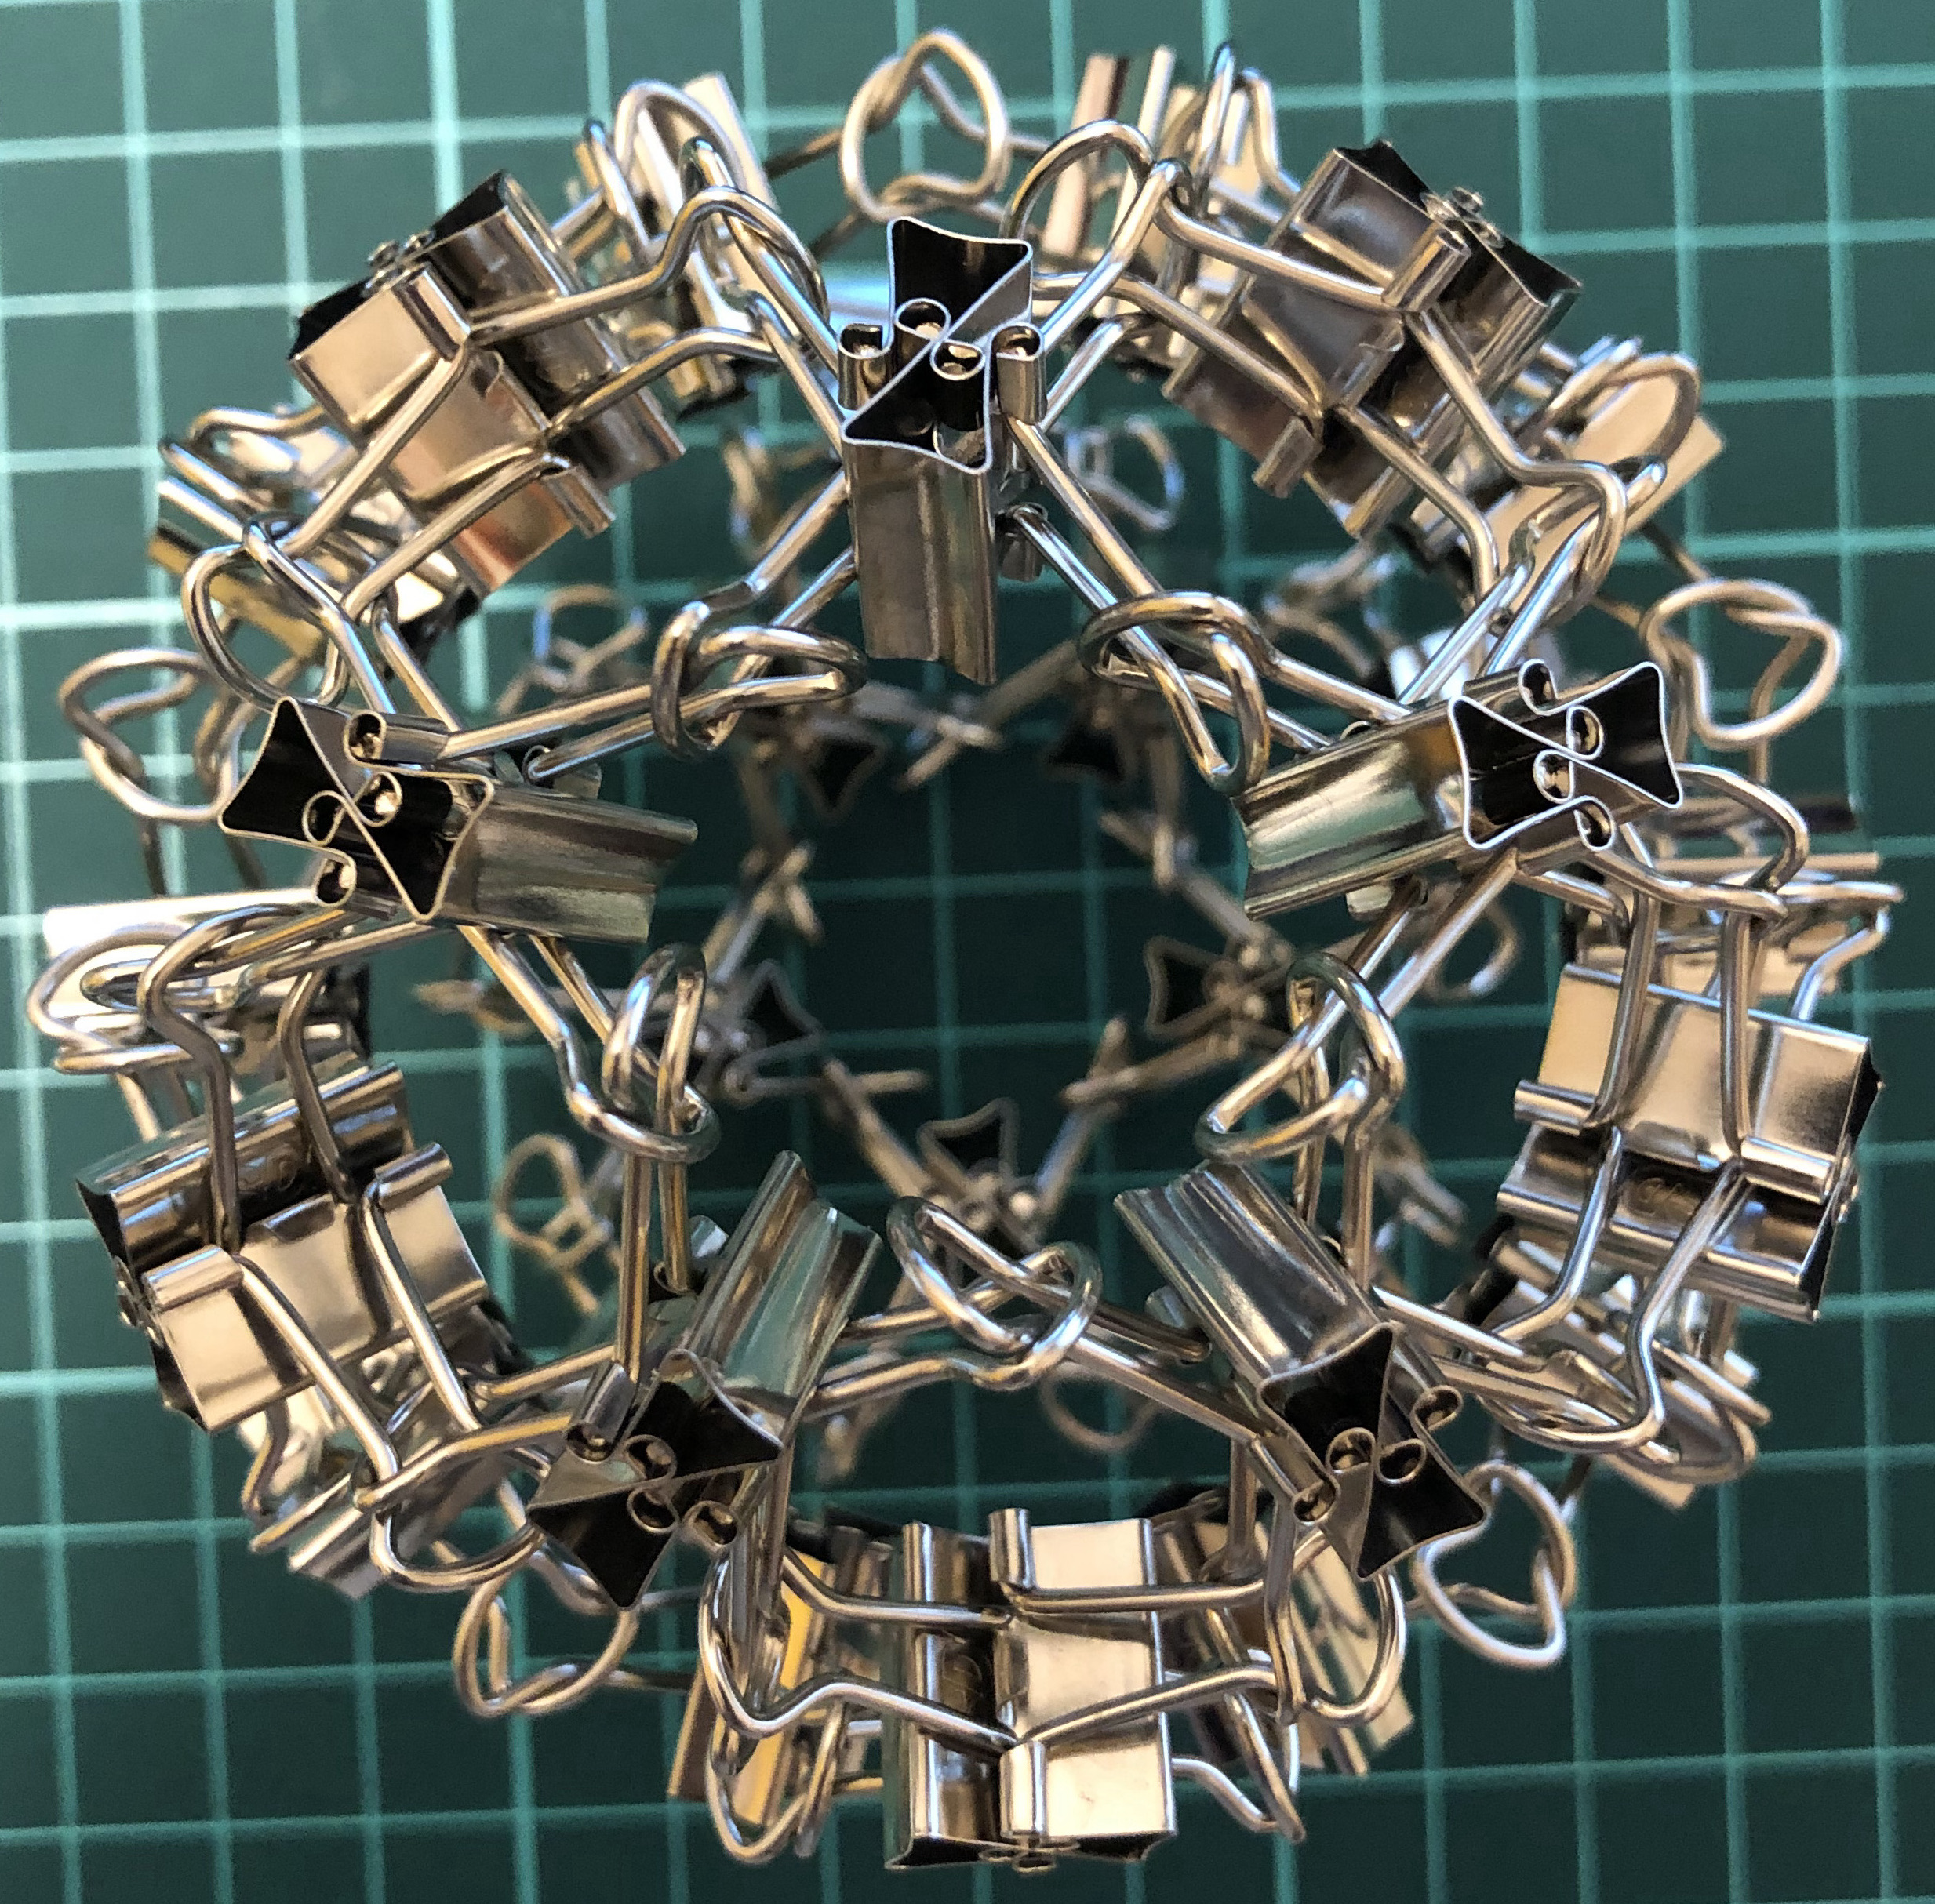 60 clips forming 30 X-edges forming icosahedron